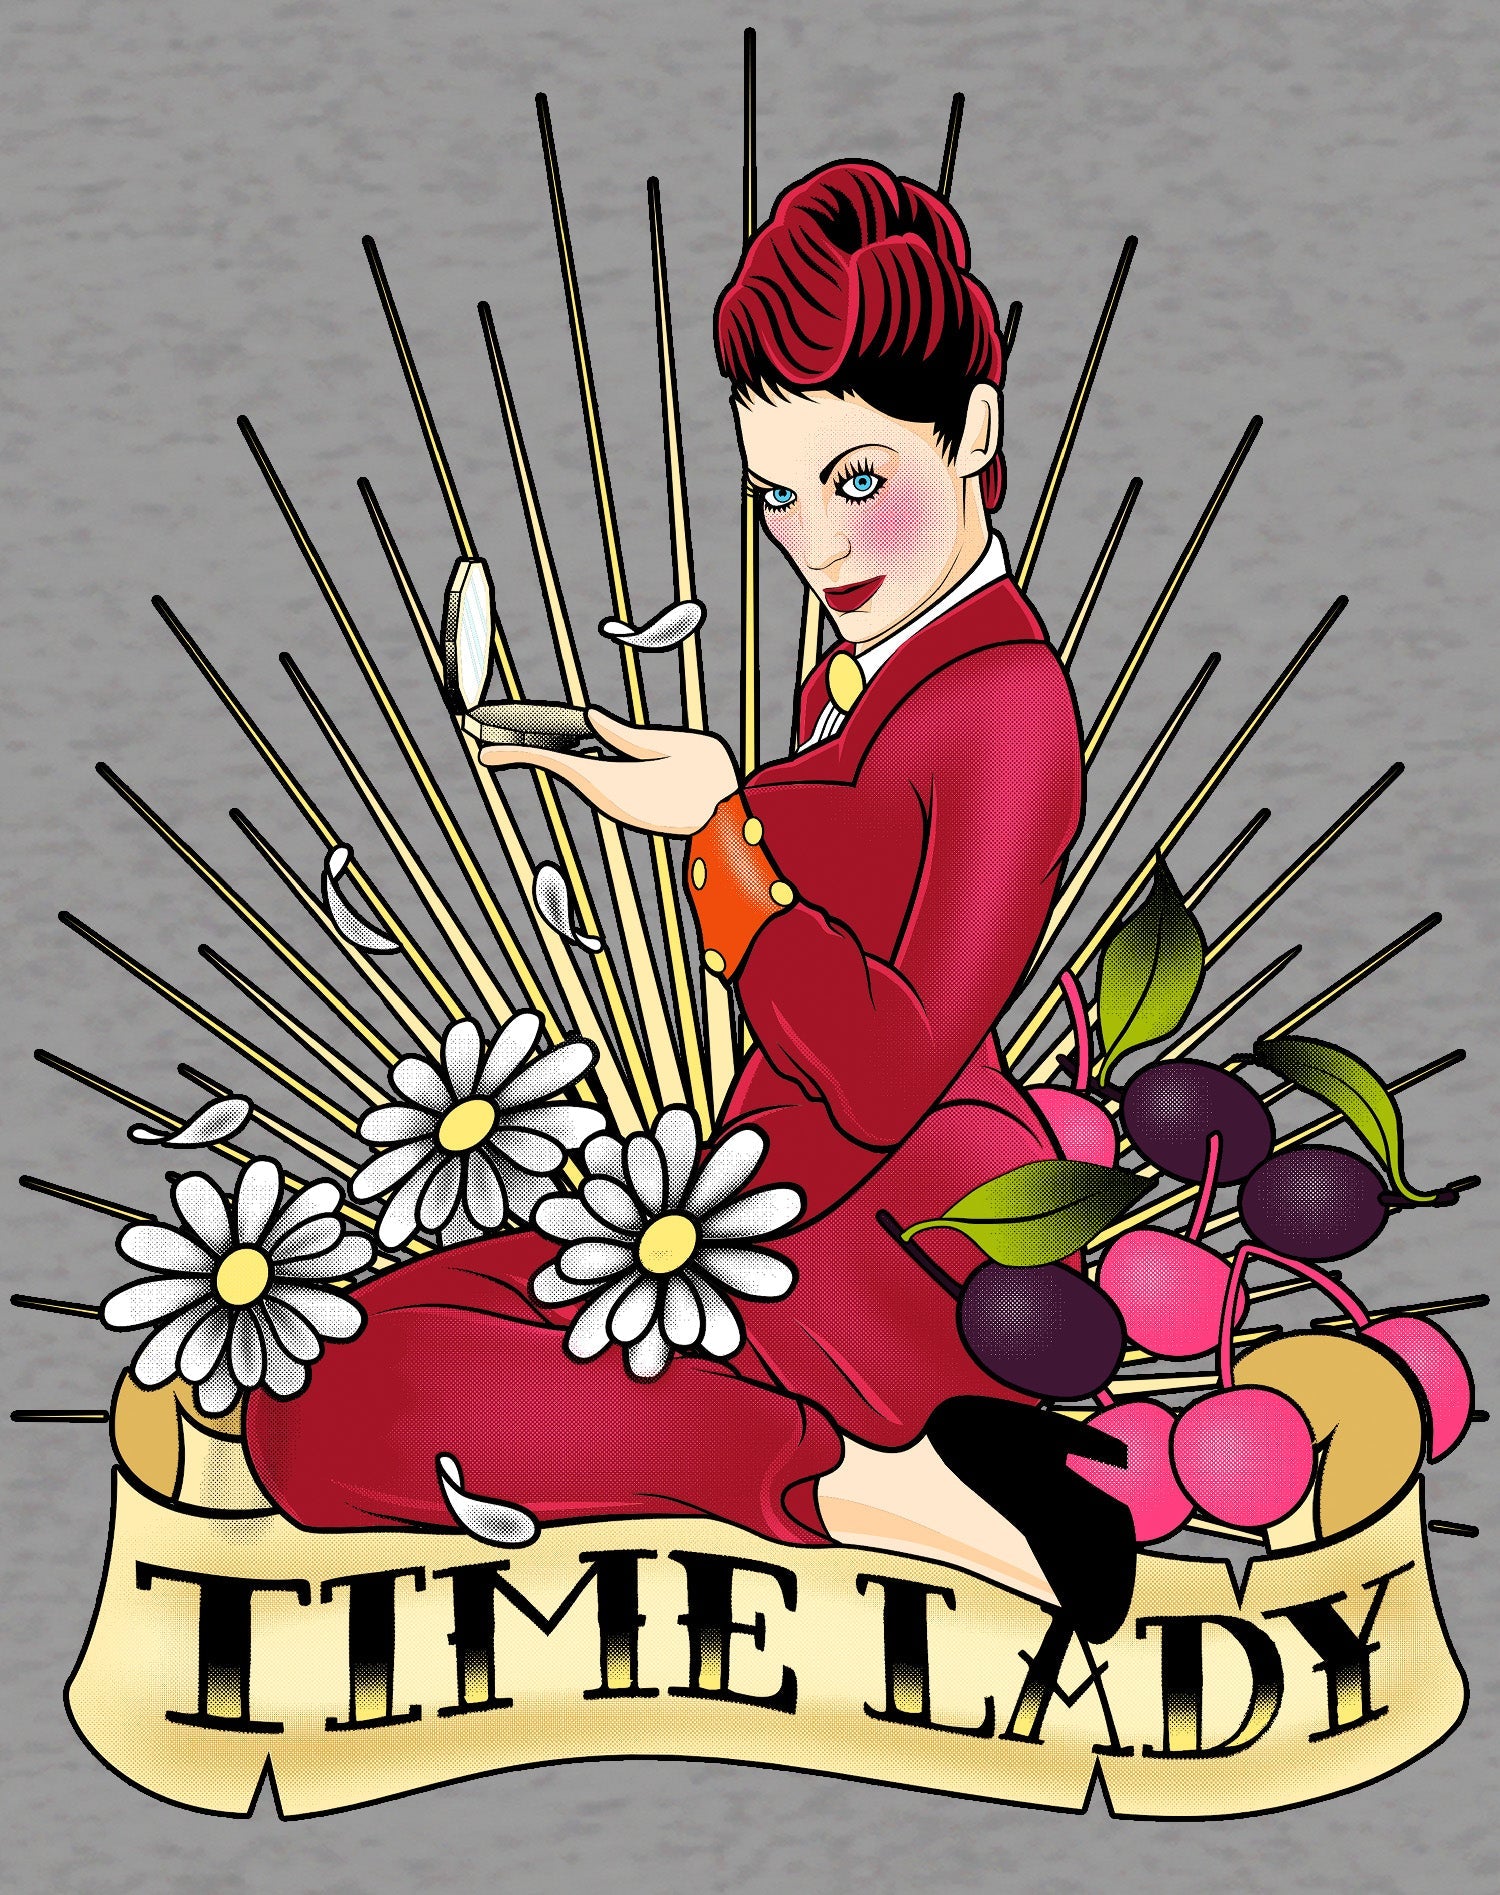 Doctor Who Rockabilly Missy Time Lady Official Sweatshirt